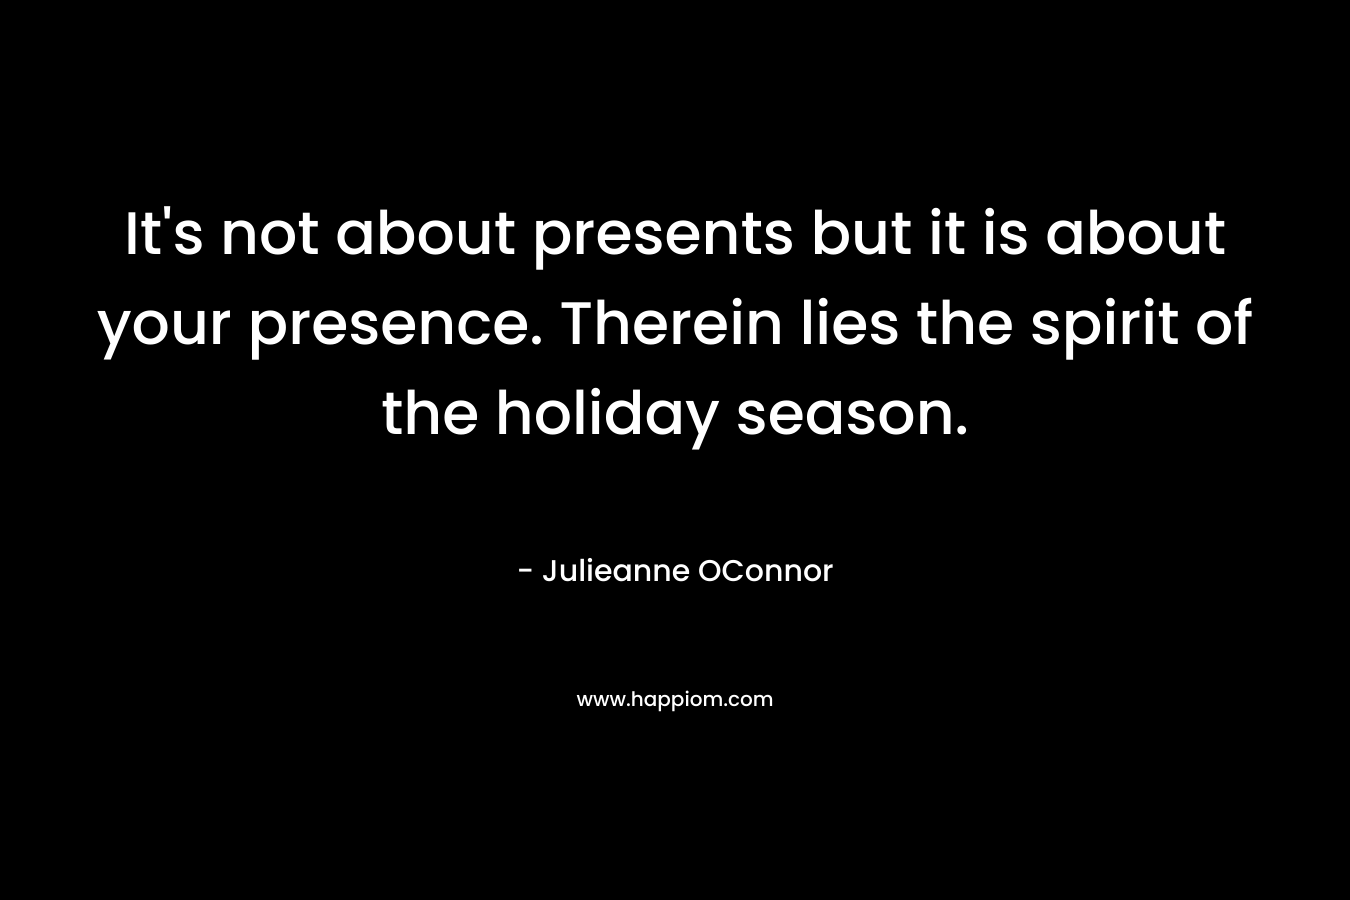 It’s not about presents but it is about your presence. Therein lies the spirit of the holiday season. – Julieanne OConnor